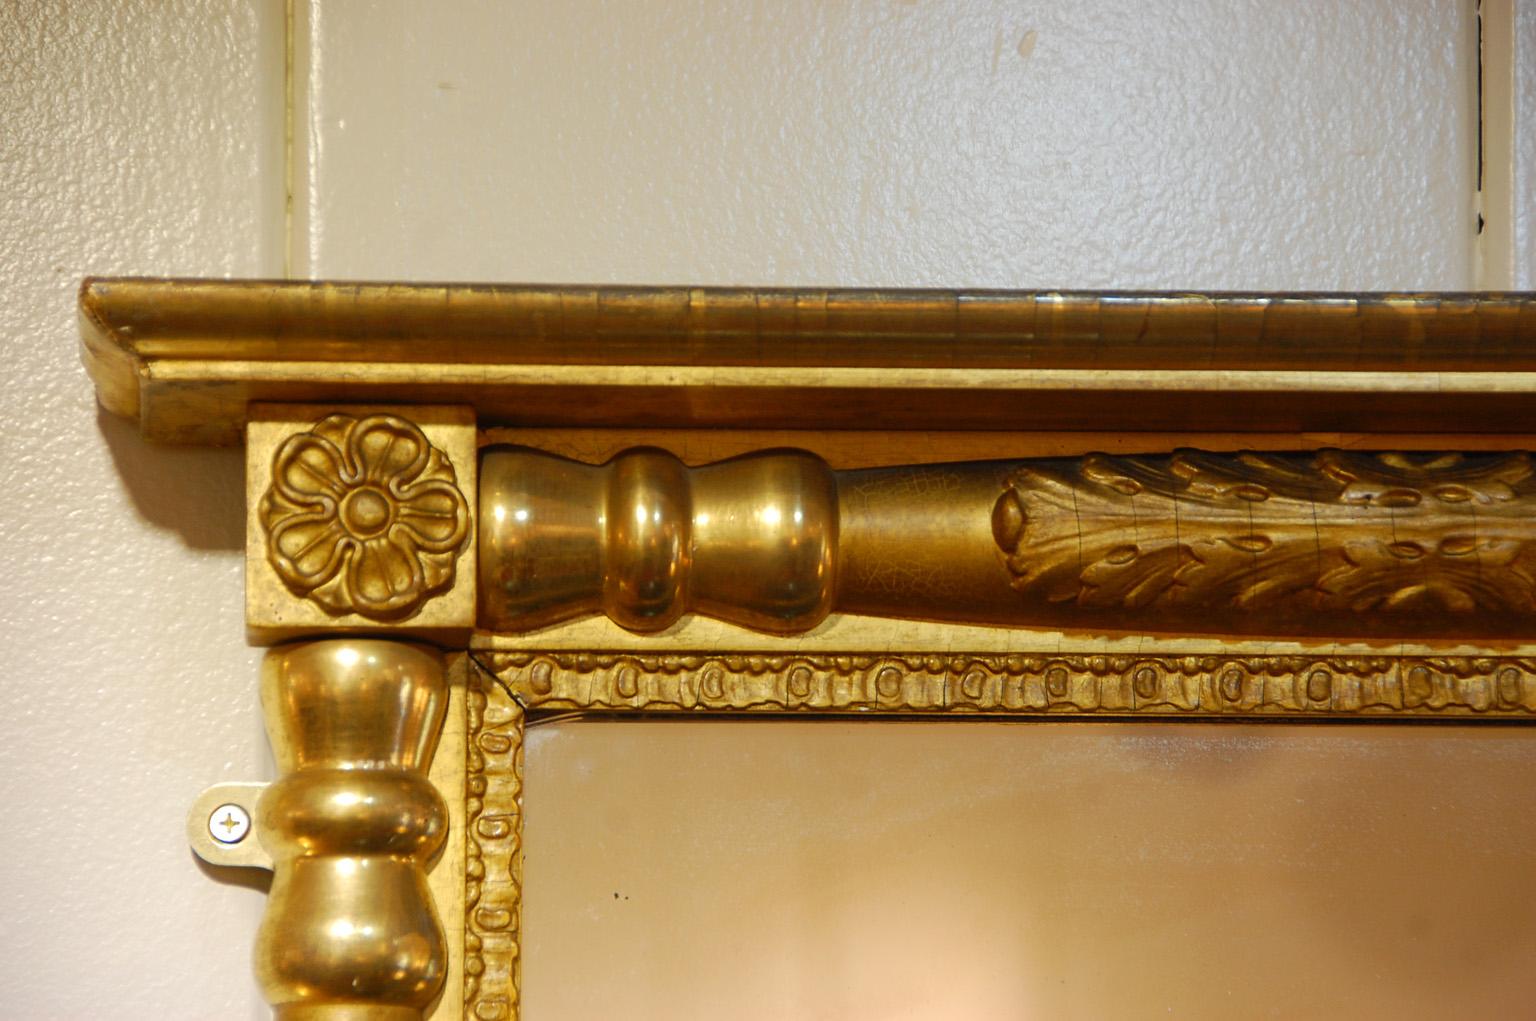 American early 19th century Federal period gold leaf overmantel mirror. This carved wooden split column mirror is enhanced by areas of brightly burnished gold which contrasts to the lightly burnished gold. The columns not only are turned but have